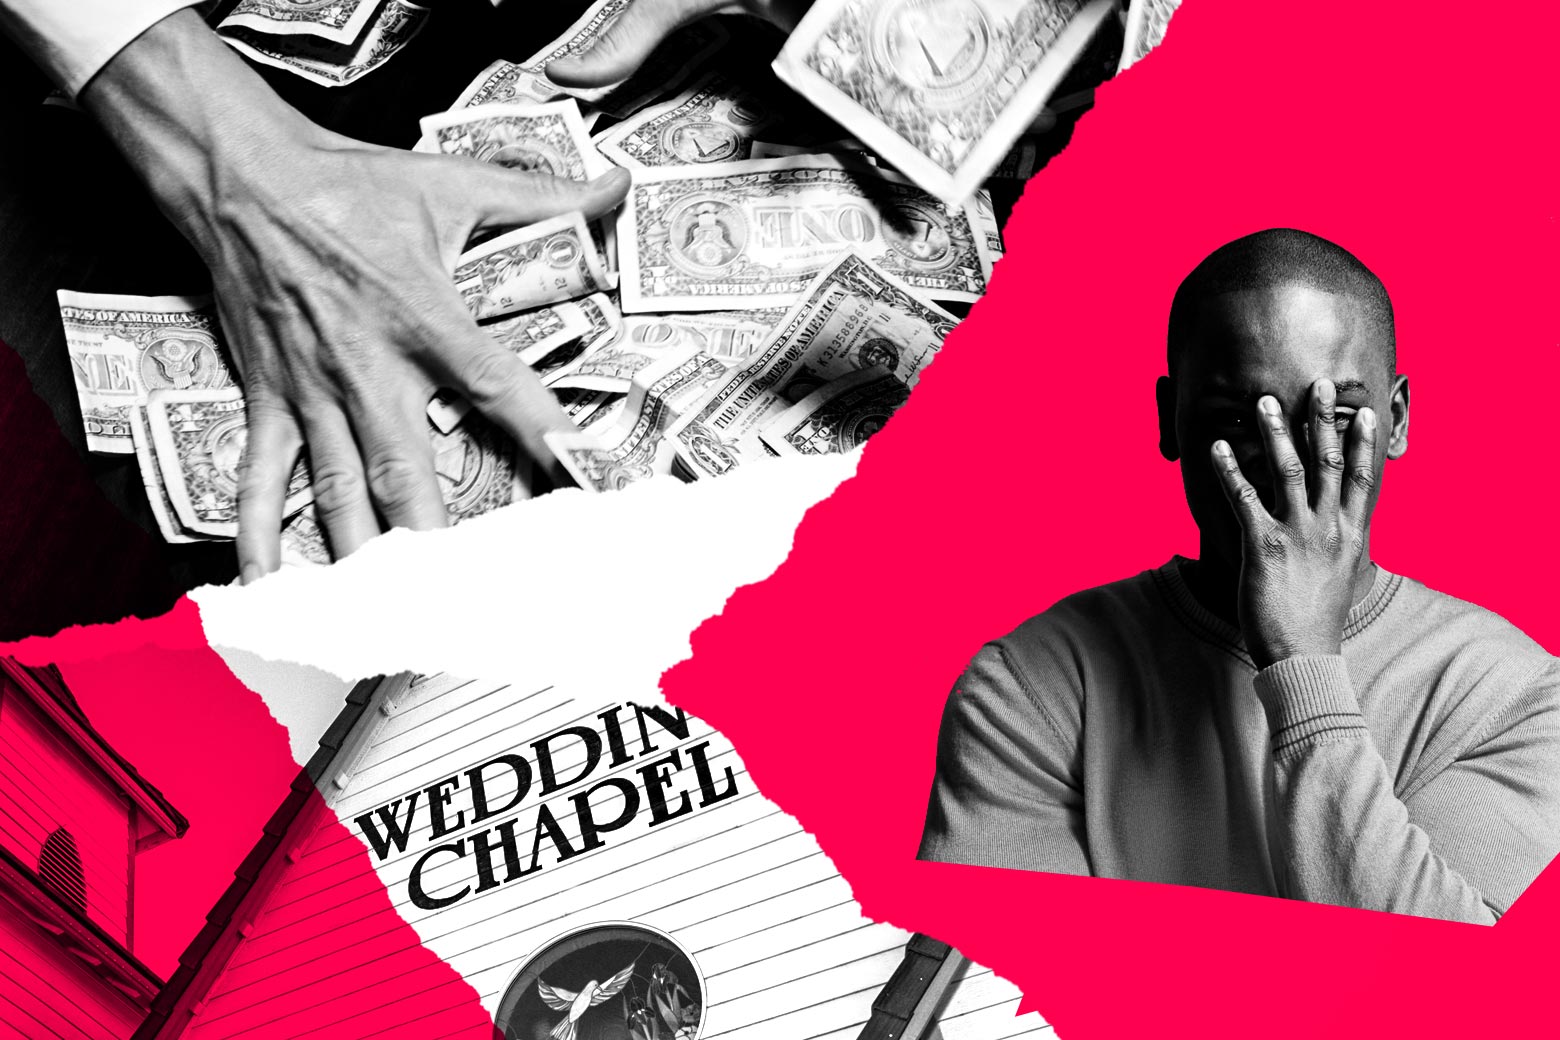 Collage of a hand grabbing at a pile of cash, a wedding chapel, and a man covering his face and looking uncomfortable.